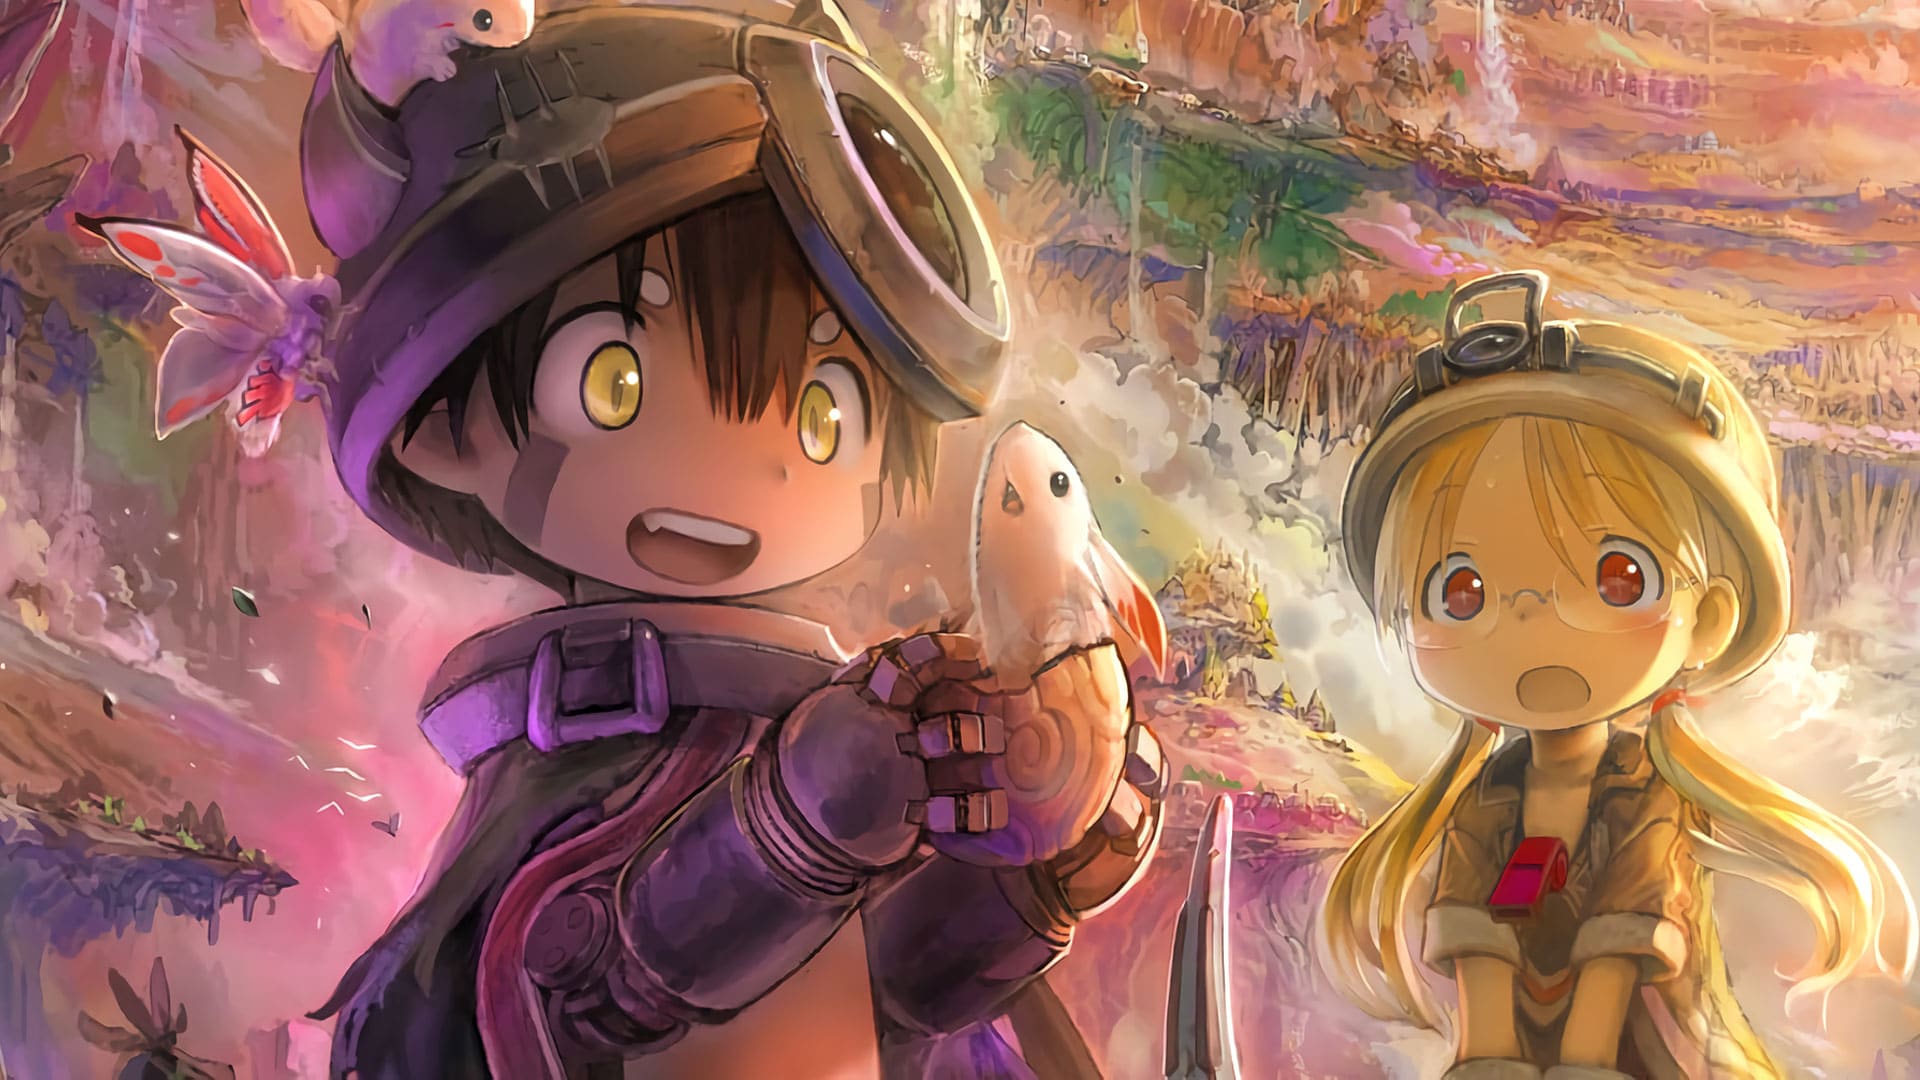 When is the Made in Abyss Season 2 release date